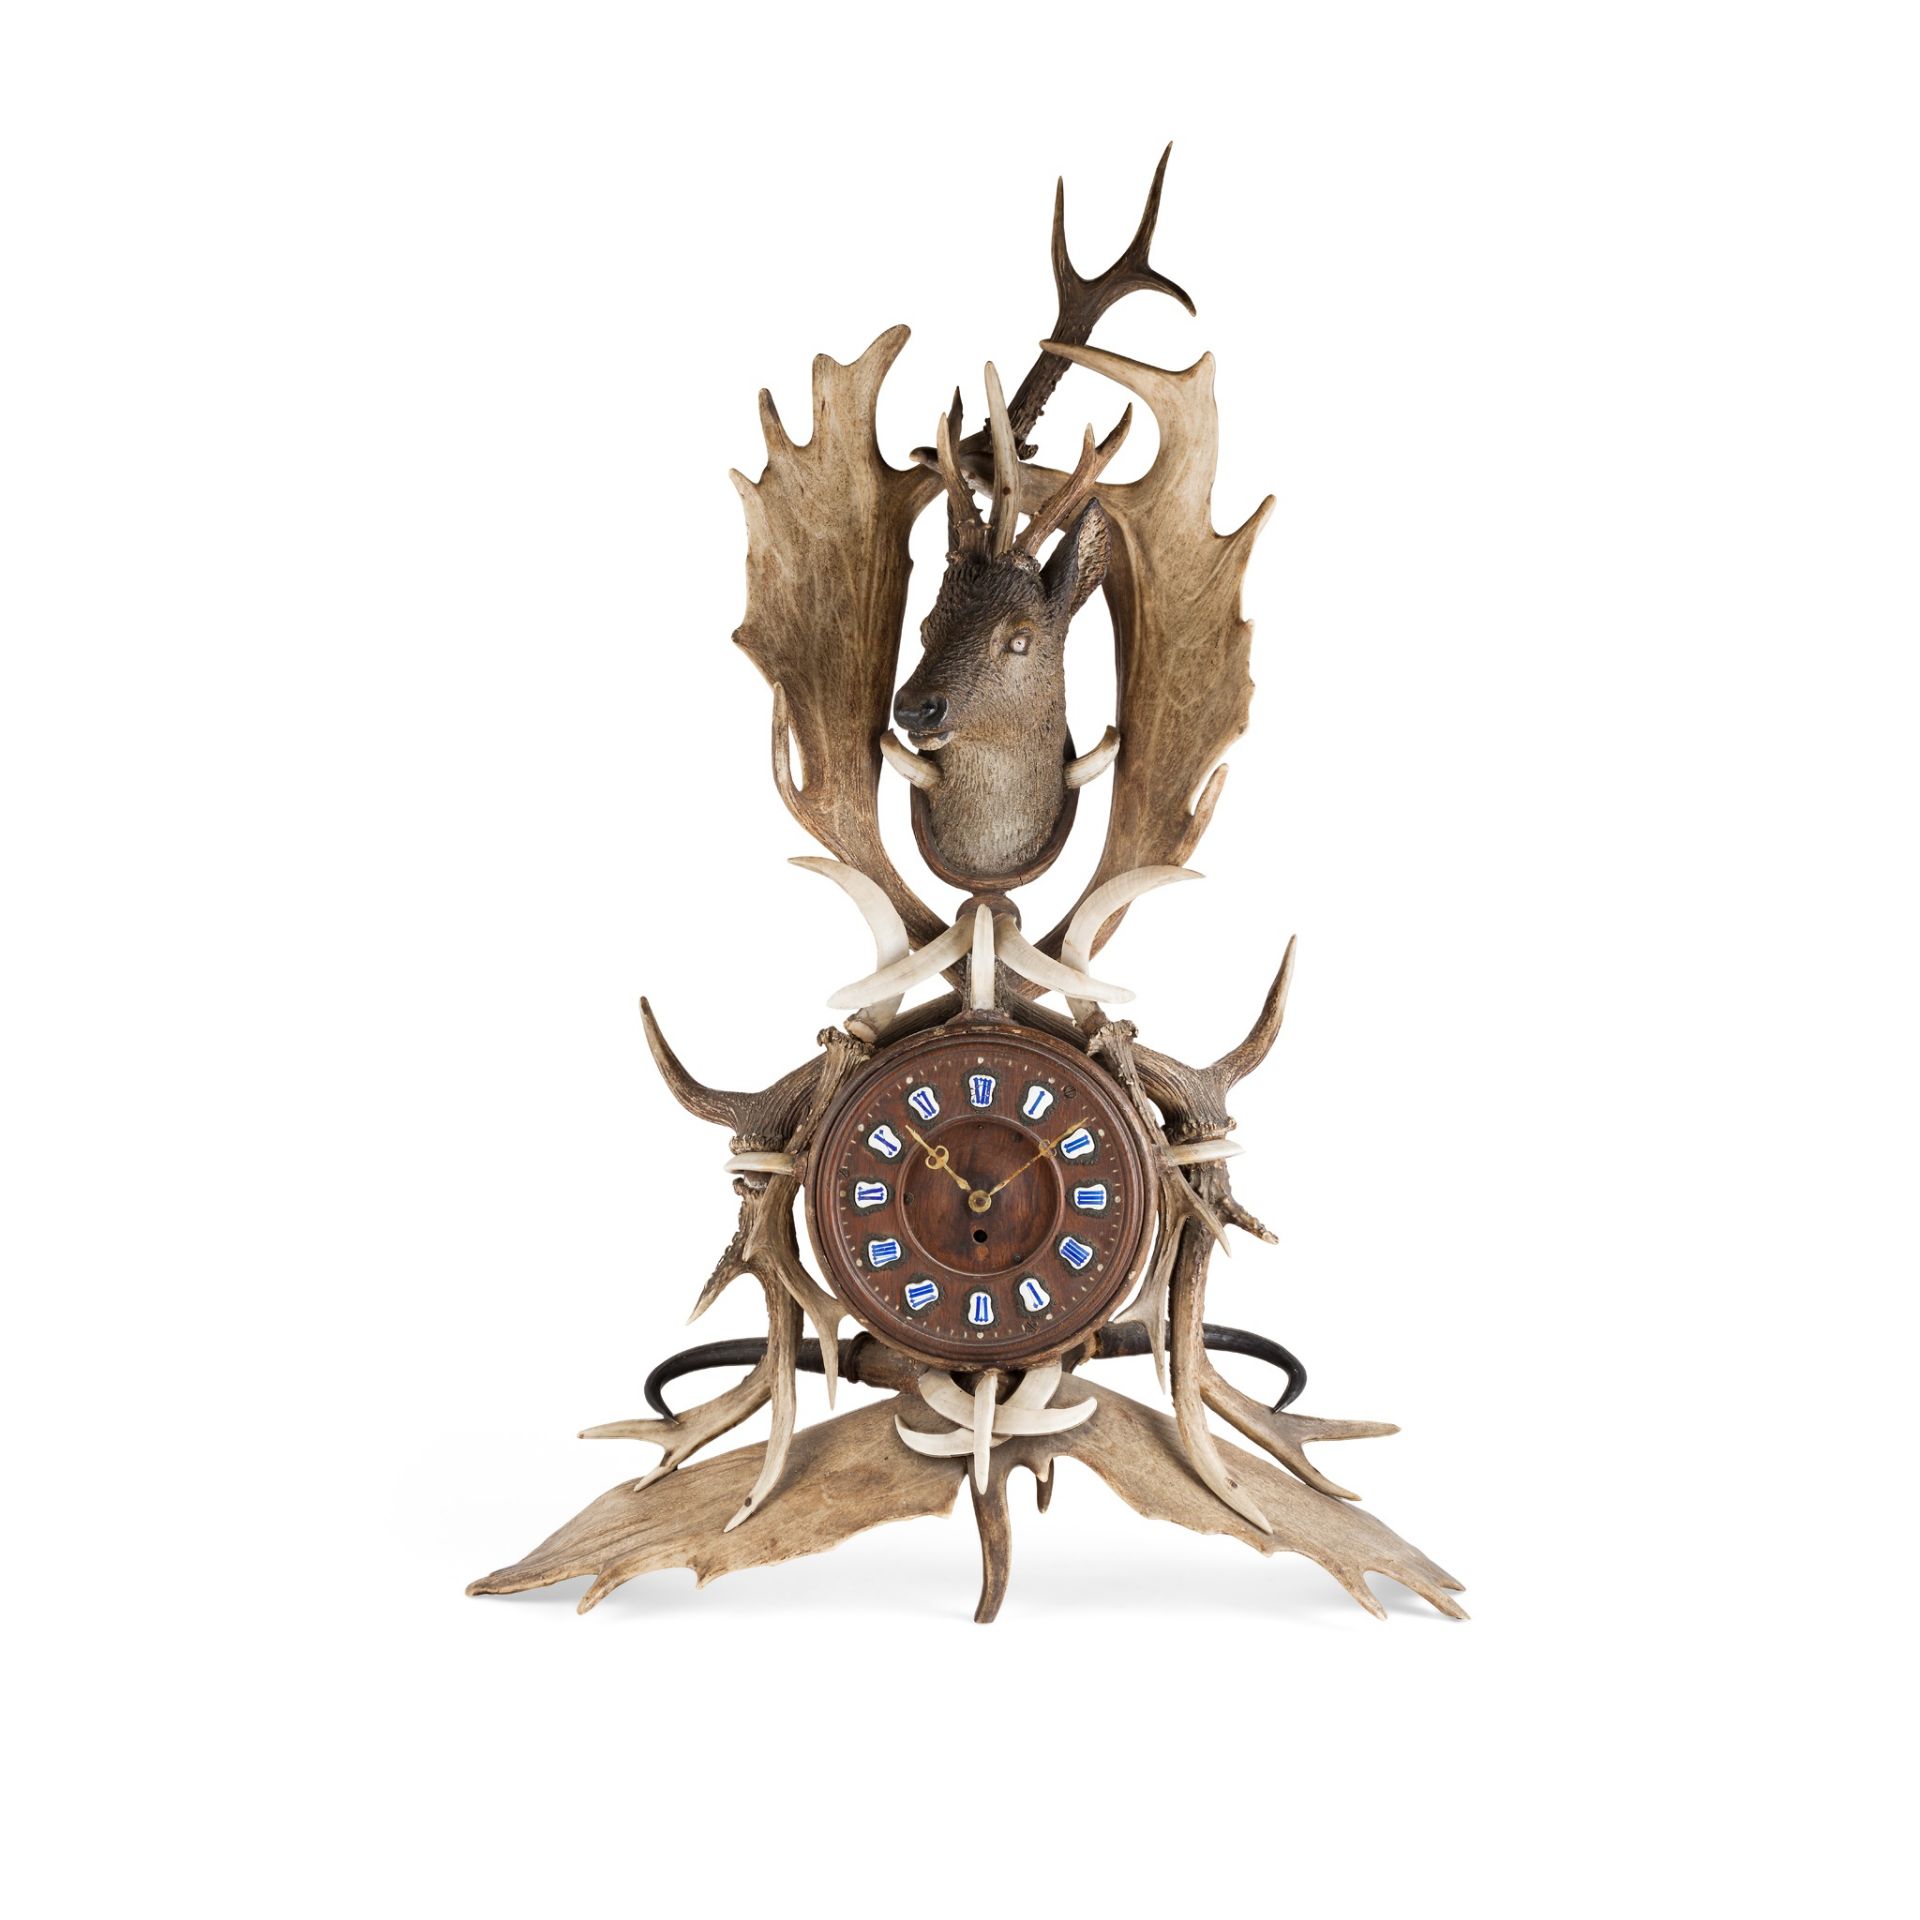 BLACK FOREST ANTLER AND WOOD MANTEL CLOCK LATE 19TH CENTURY